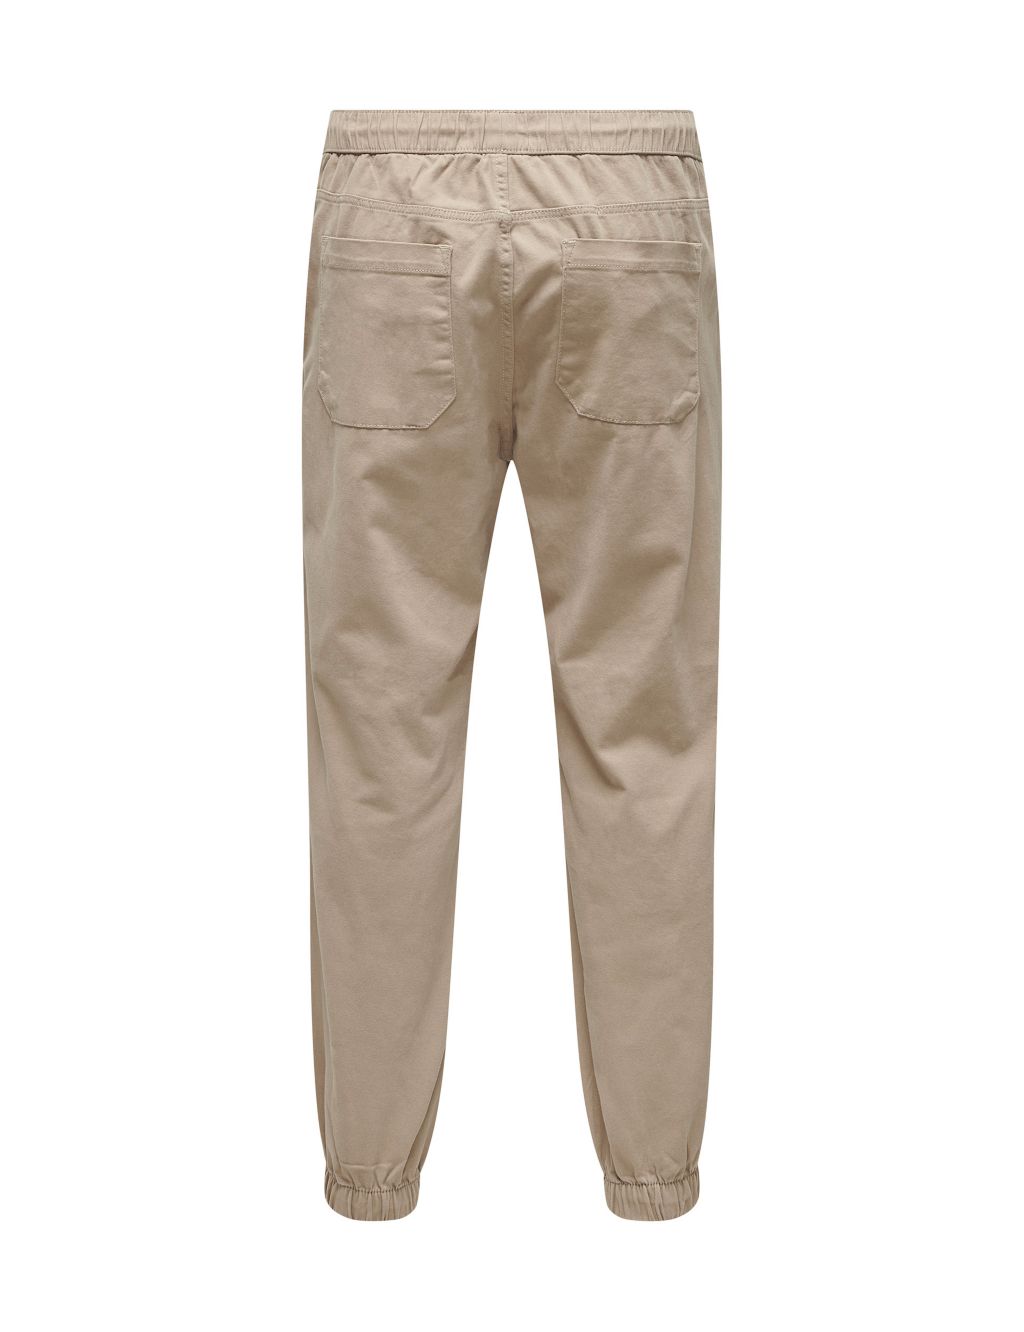 Tapered Fit Cuffed Chinos image 7